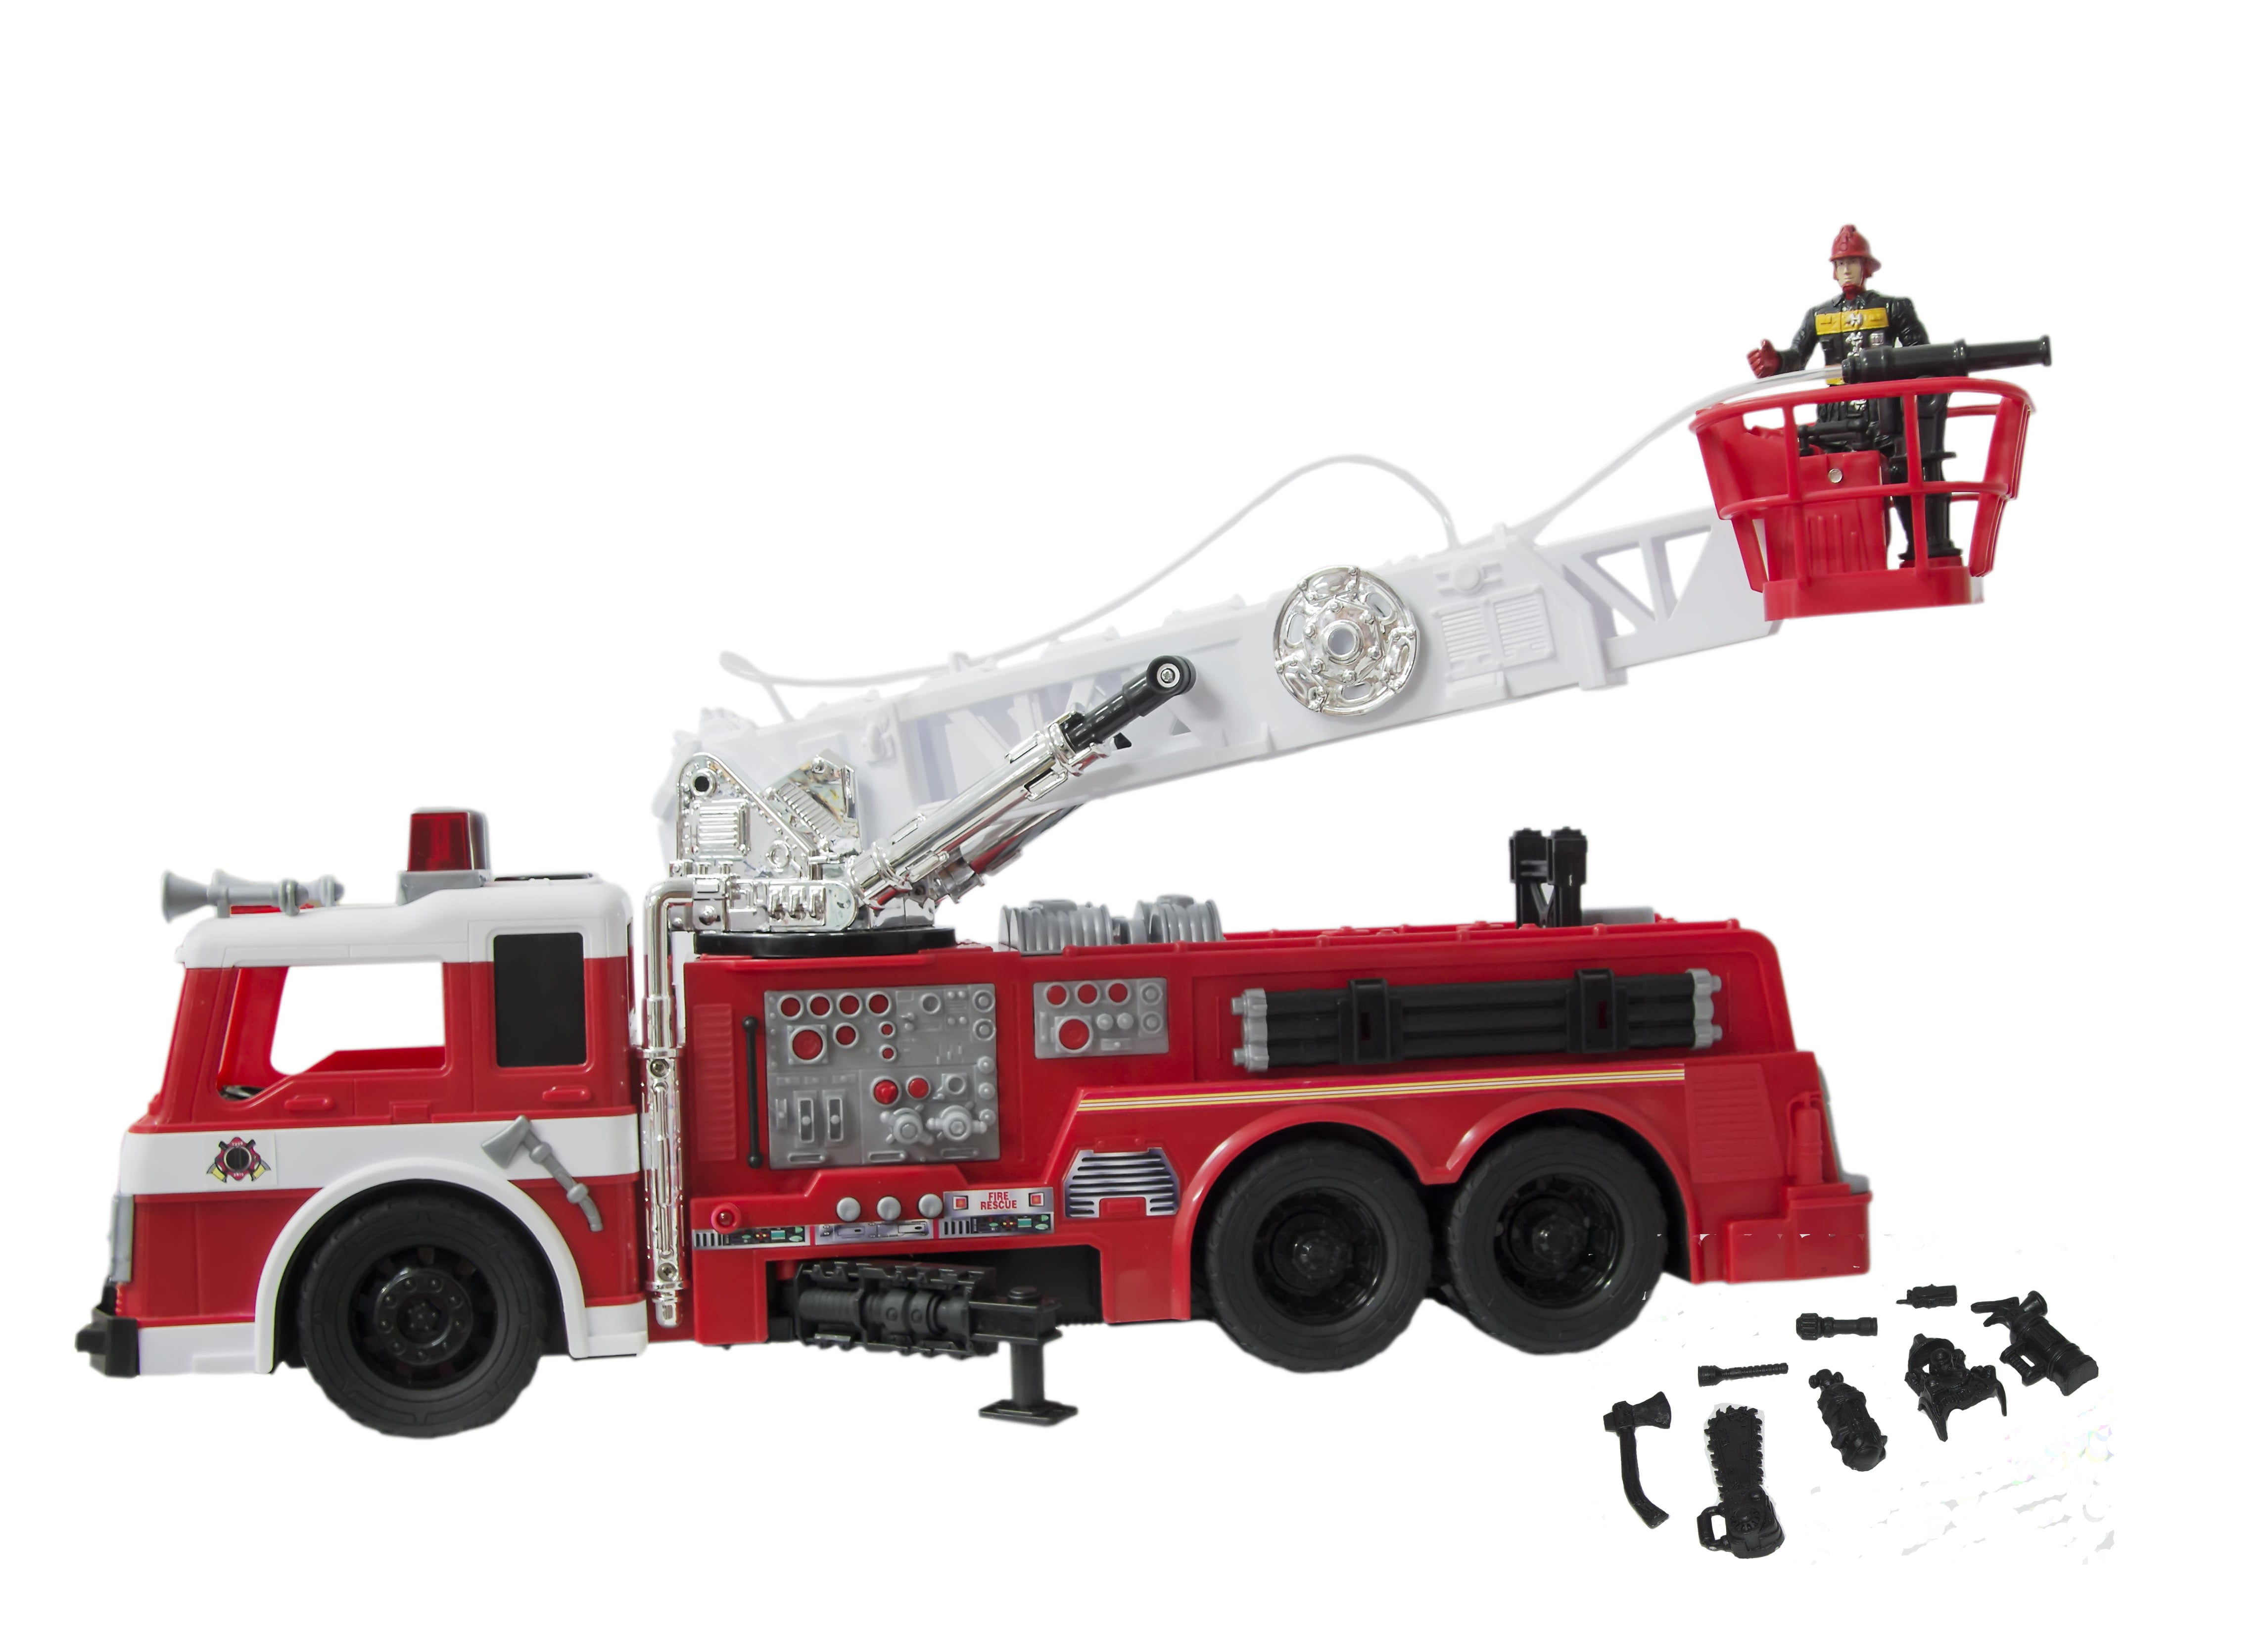 kid connection fire truck play set